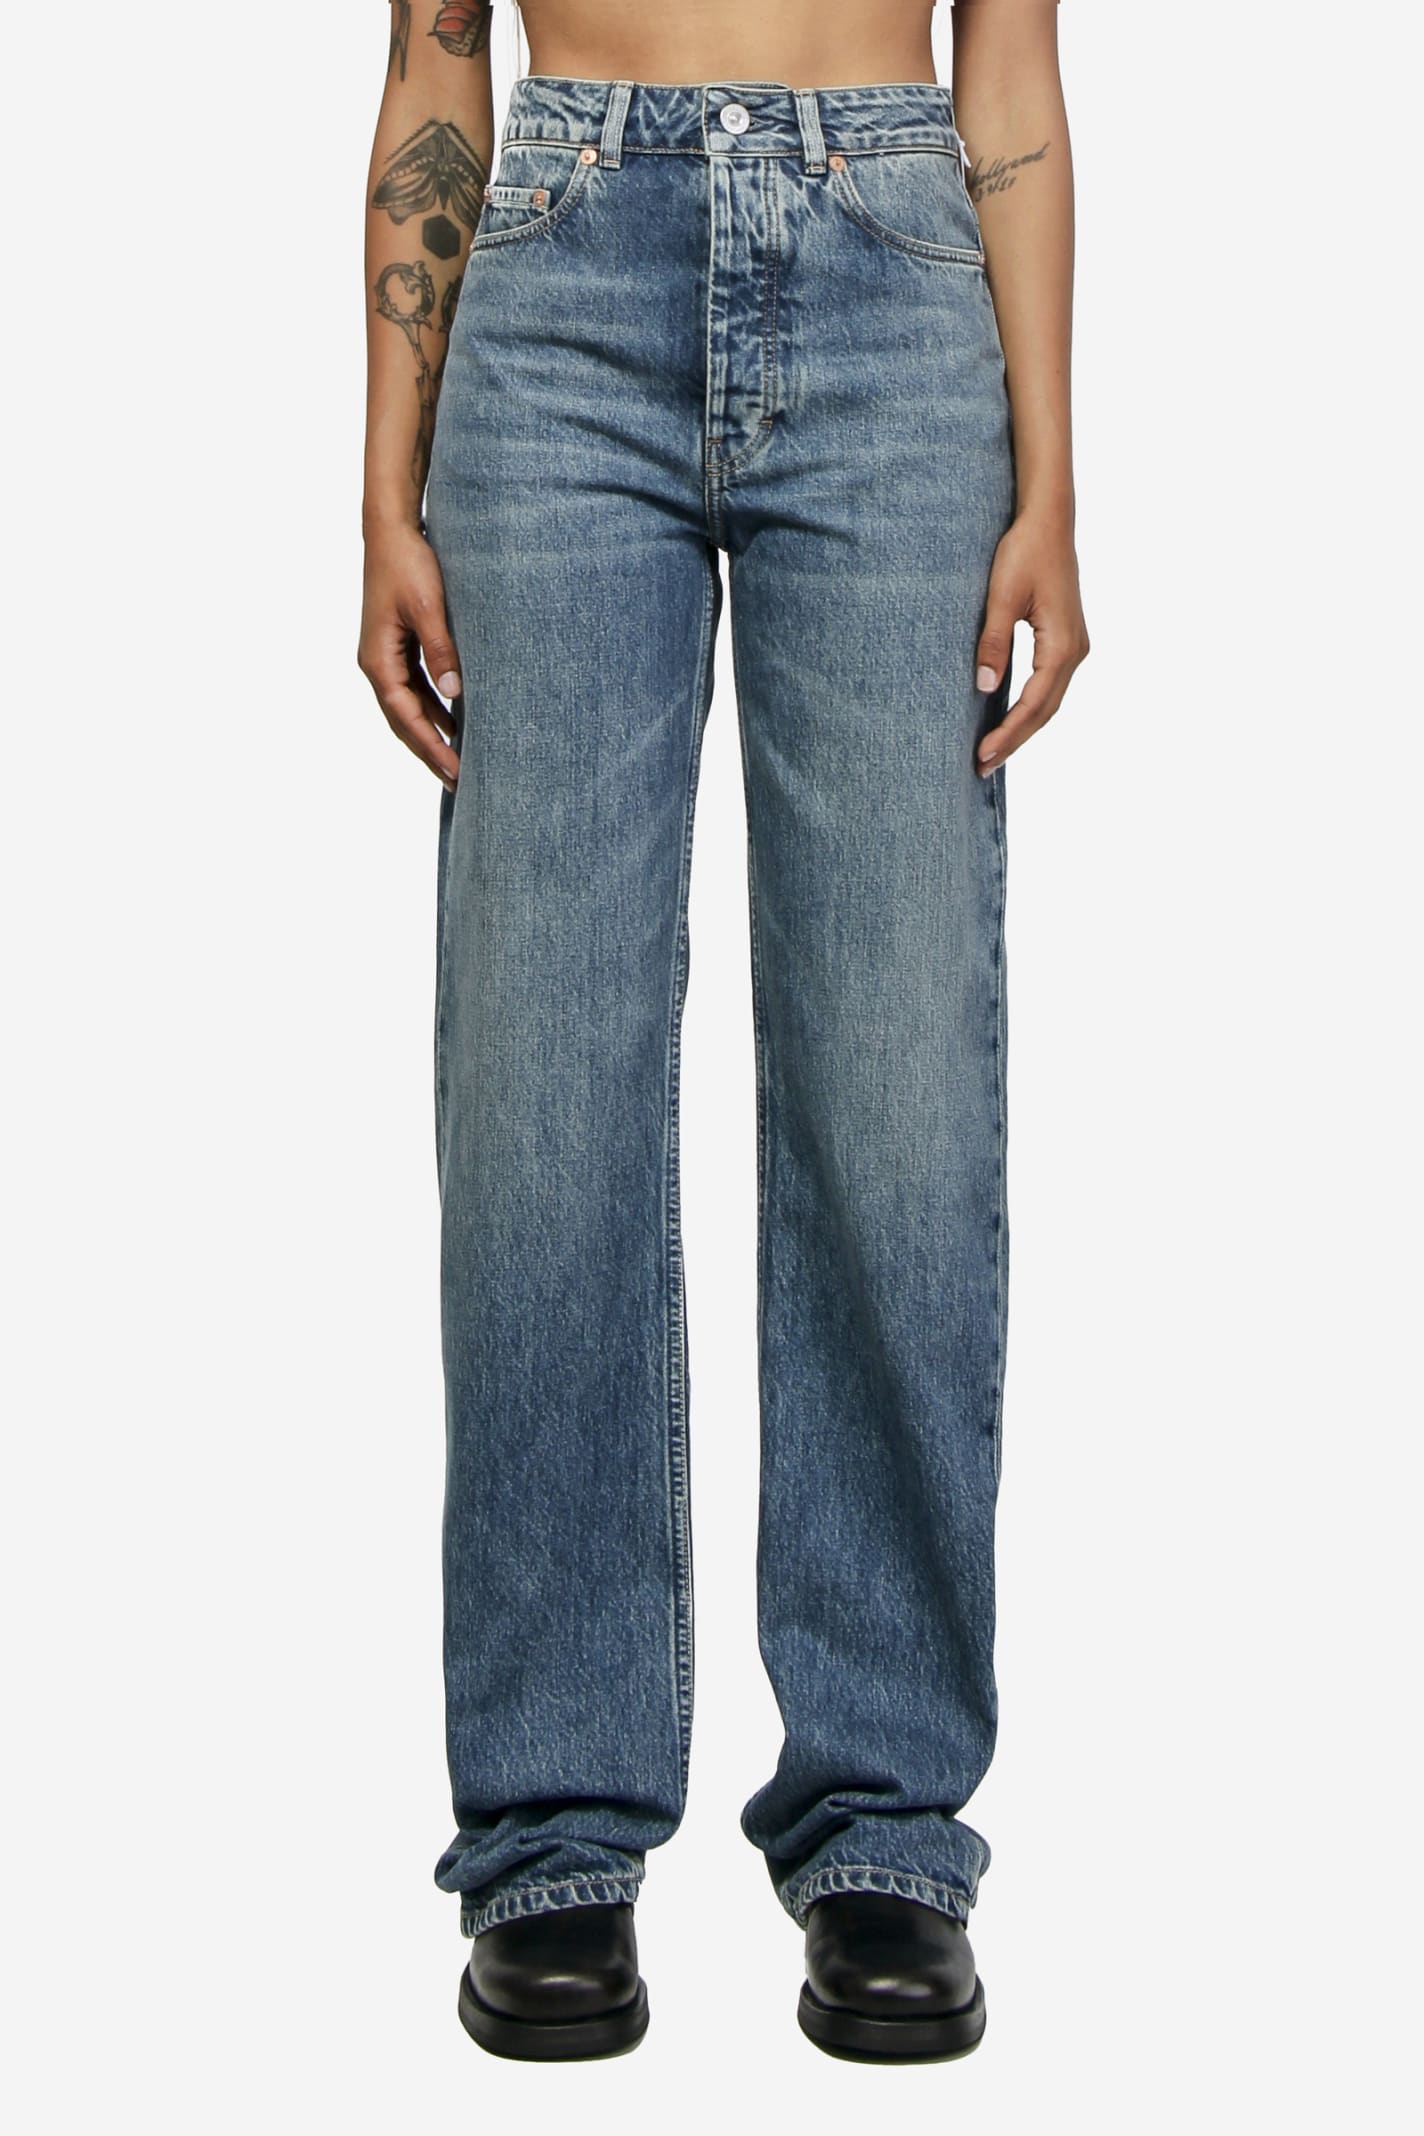 Our Legacy Spiral Cut Jeans